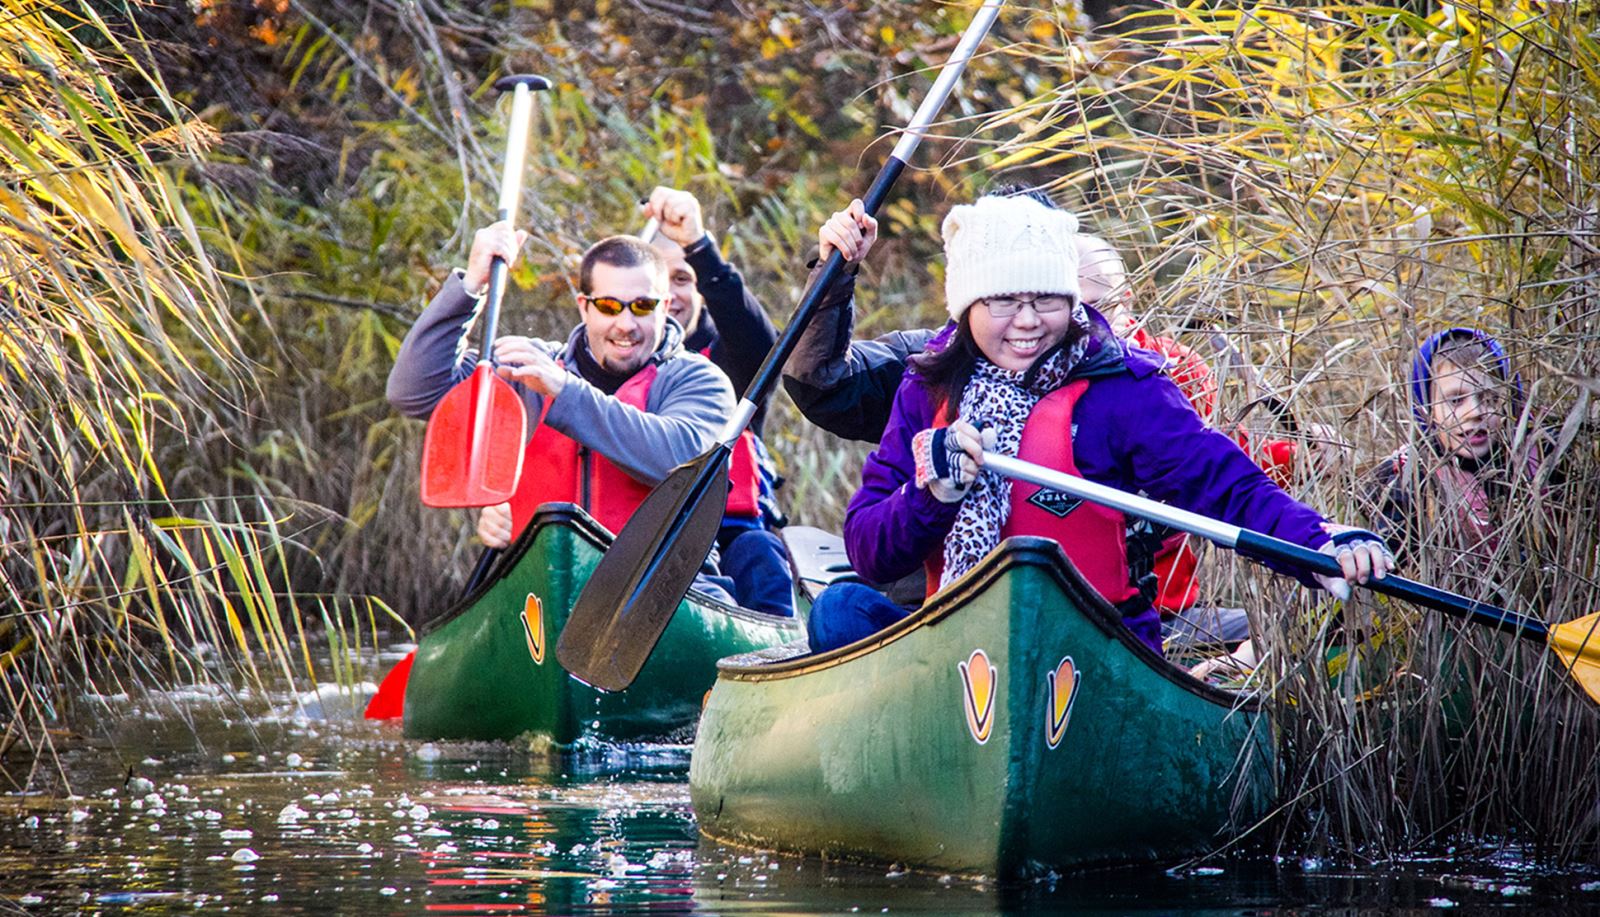 Winter canoeing with New Forest Activities on the Beaulieu River